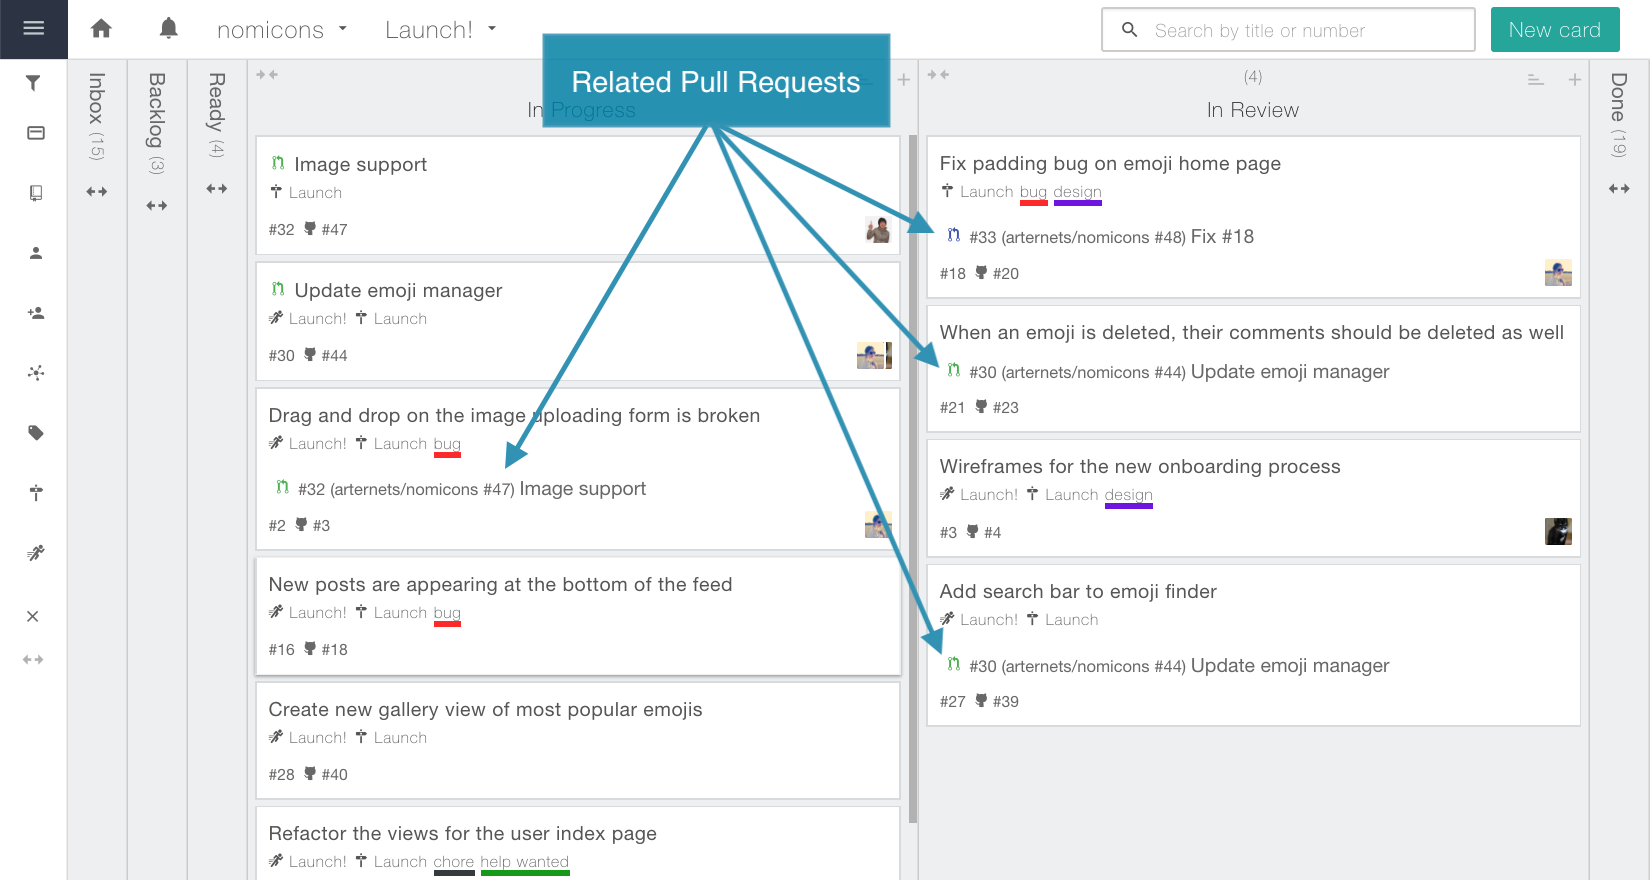 Kanban Board showing Cards with Related Pull Requests